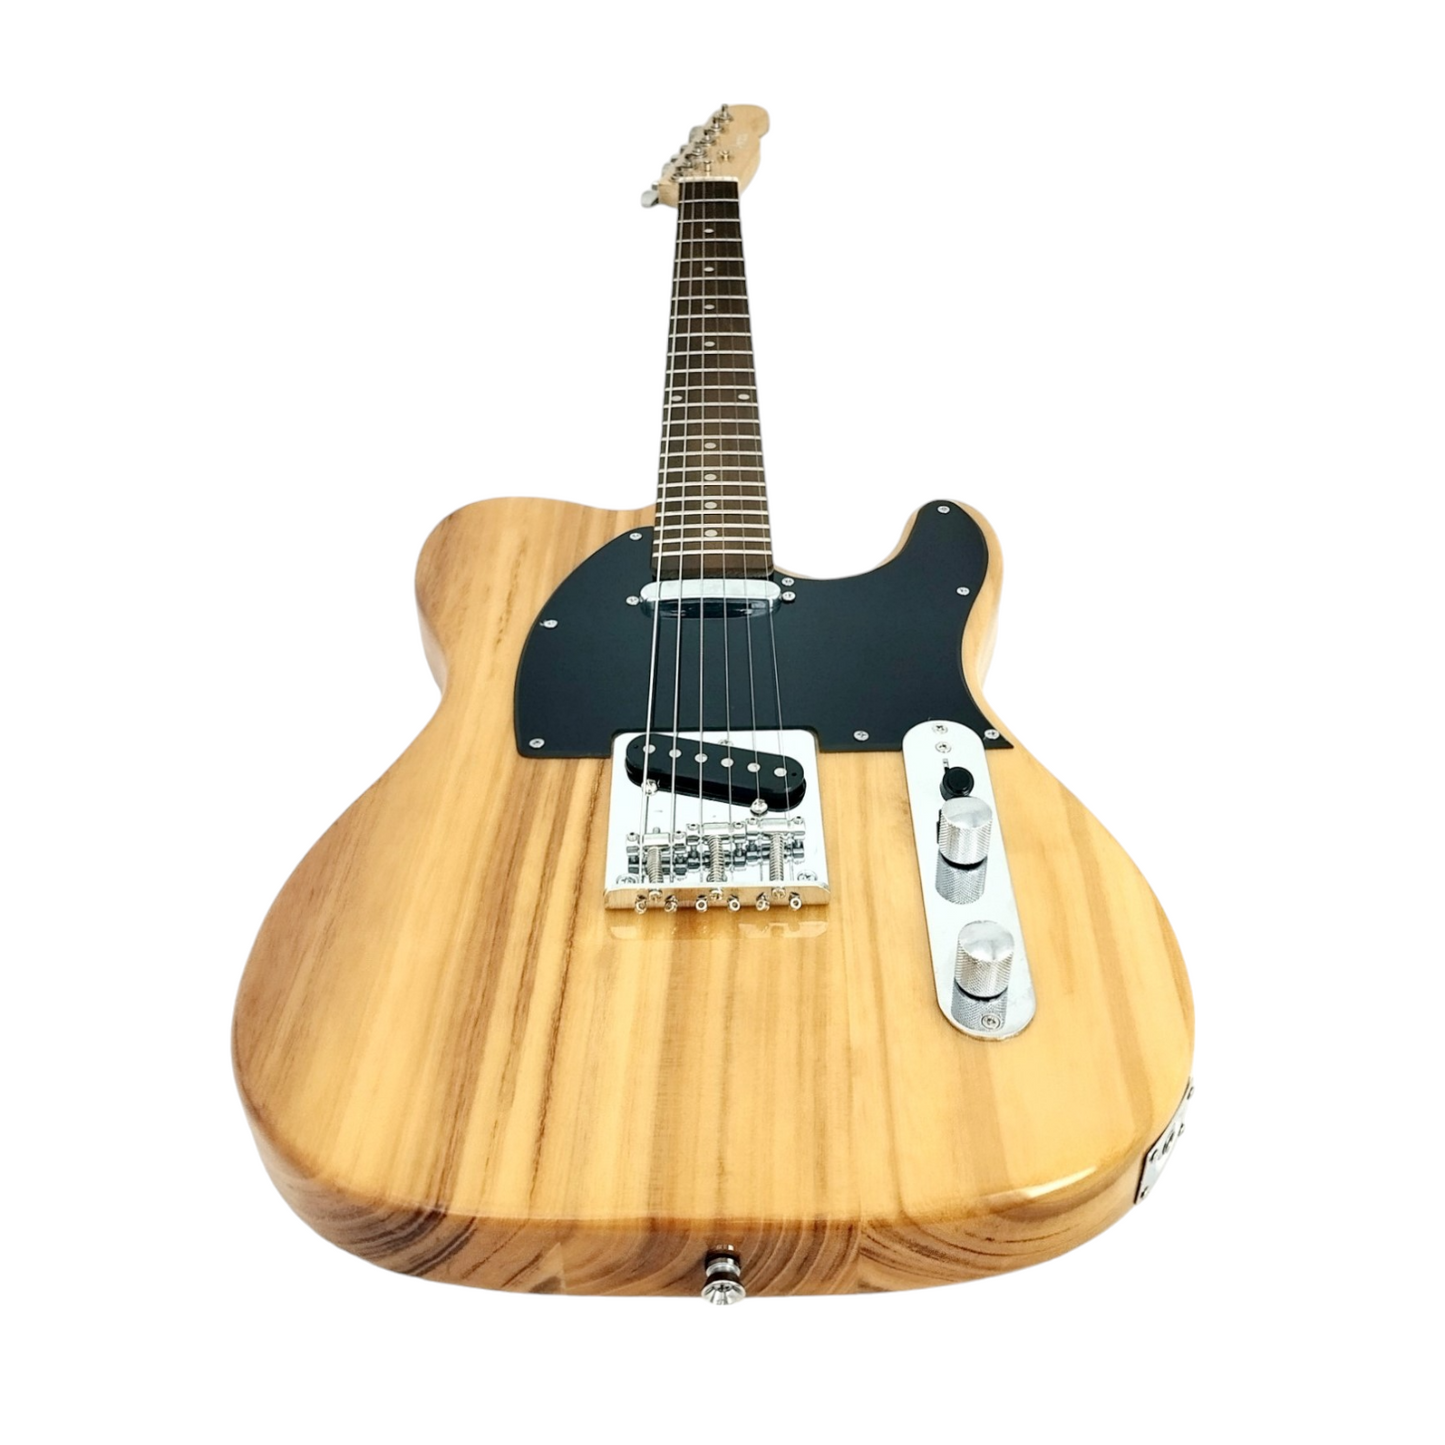 Haze Solid Paulownia Body with Maple Neck Rosewood Fingerboard HTL Electric Guitar - Natural HSTL10NT